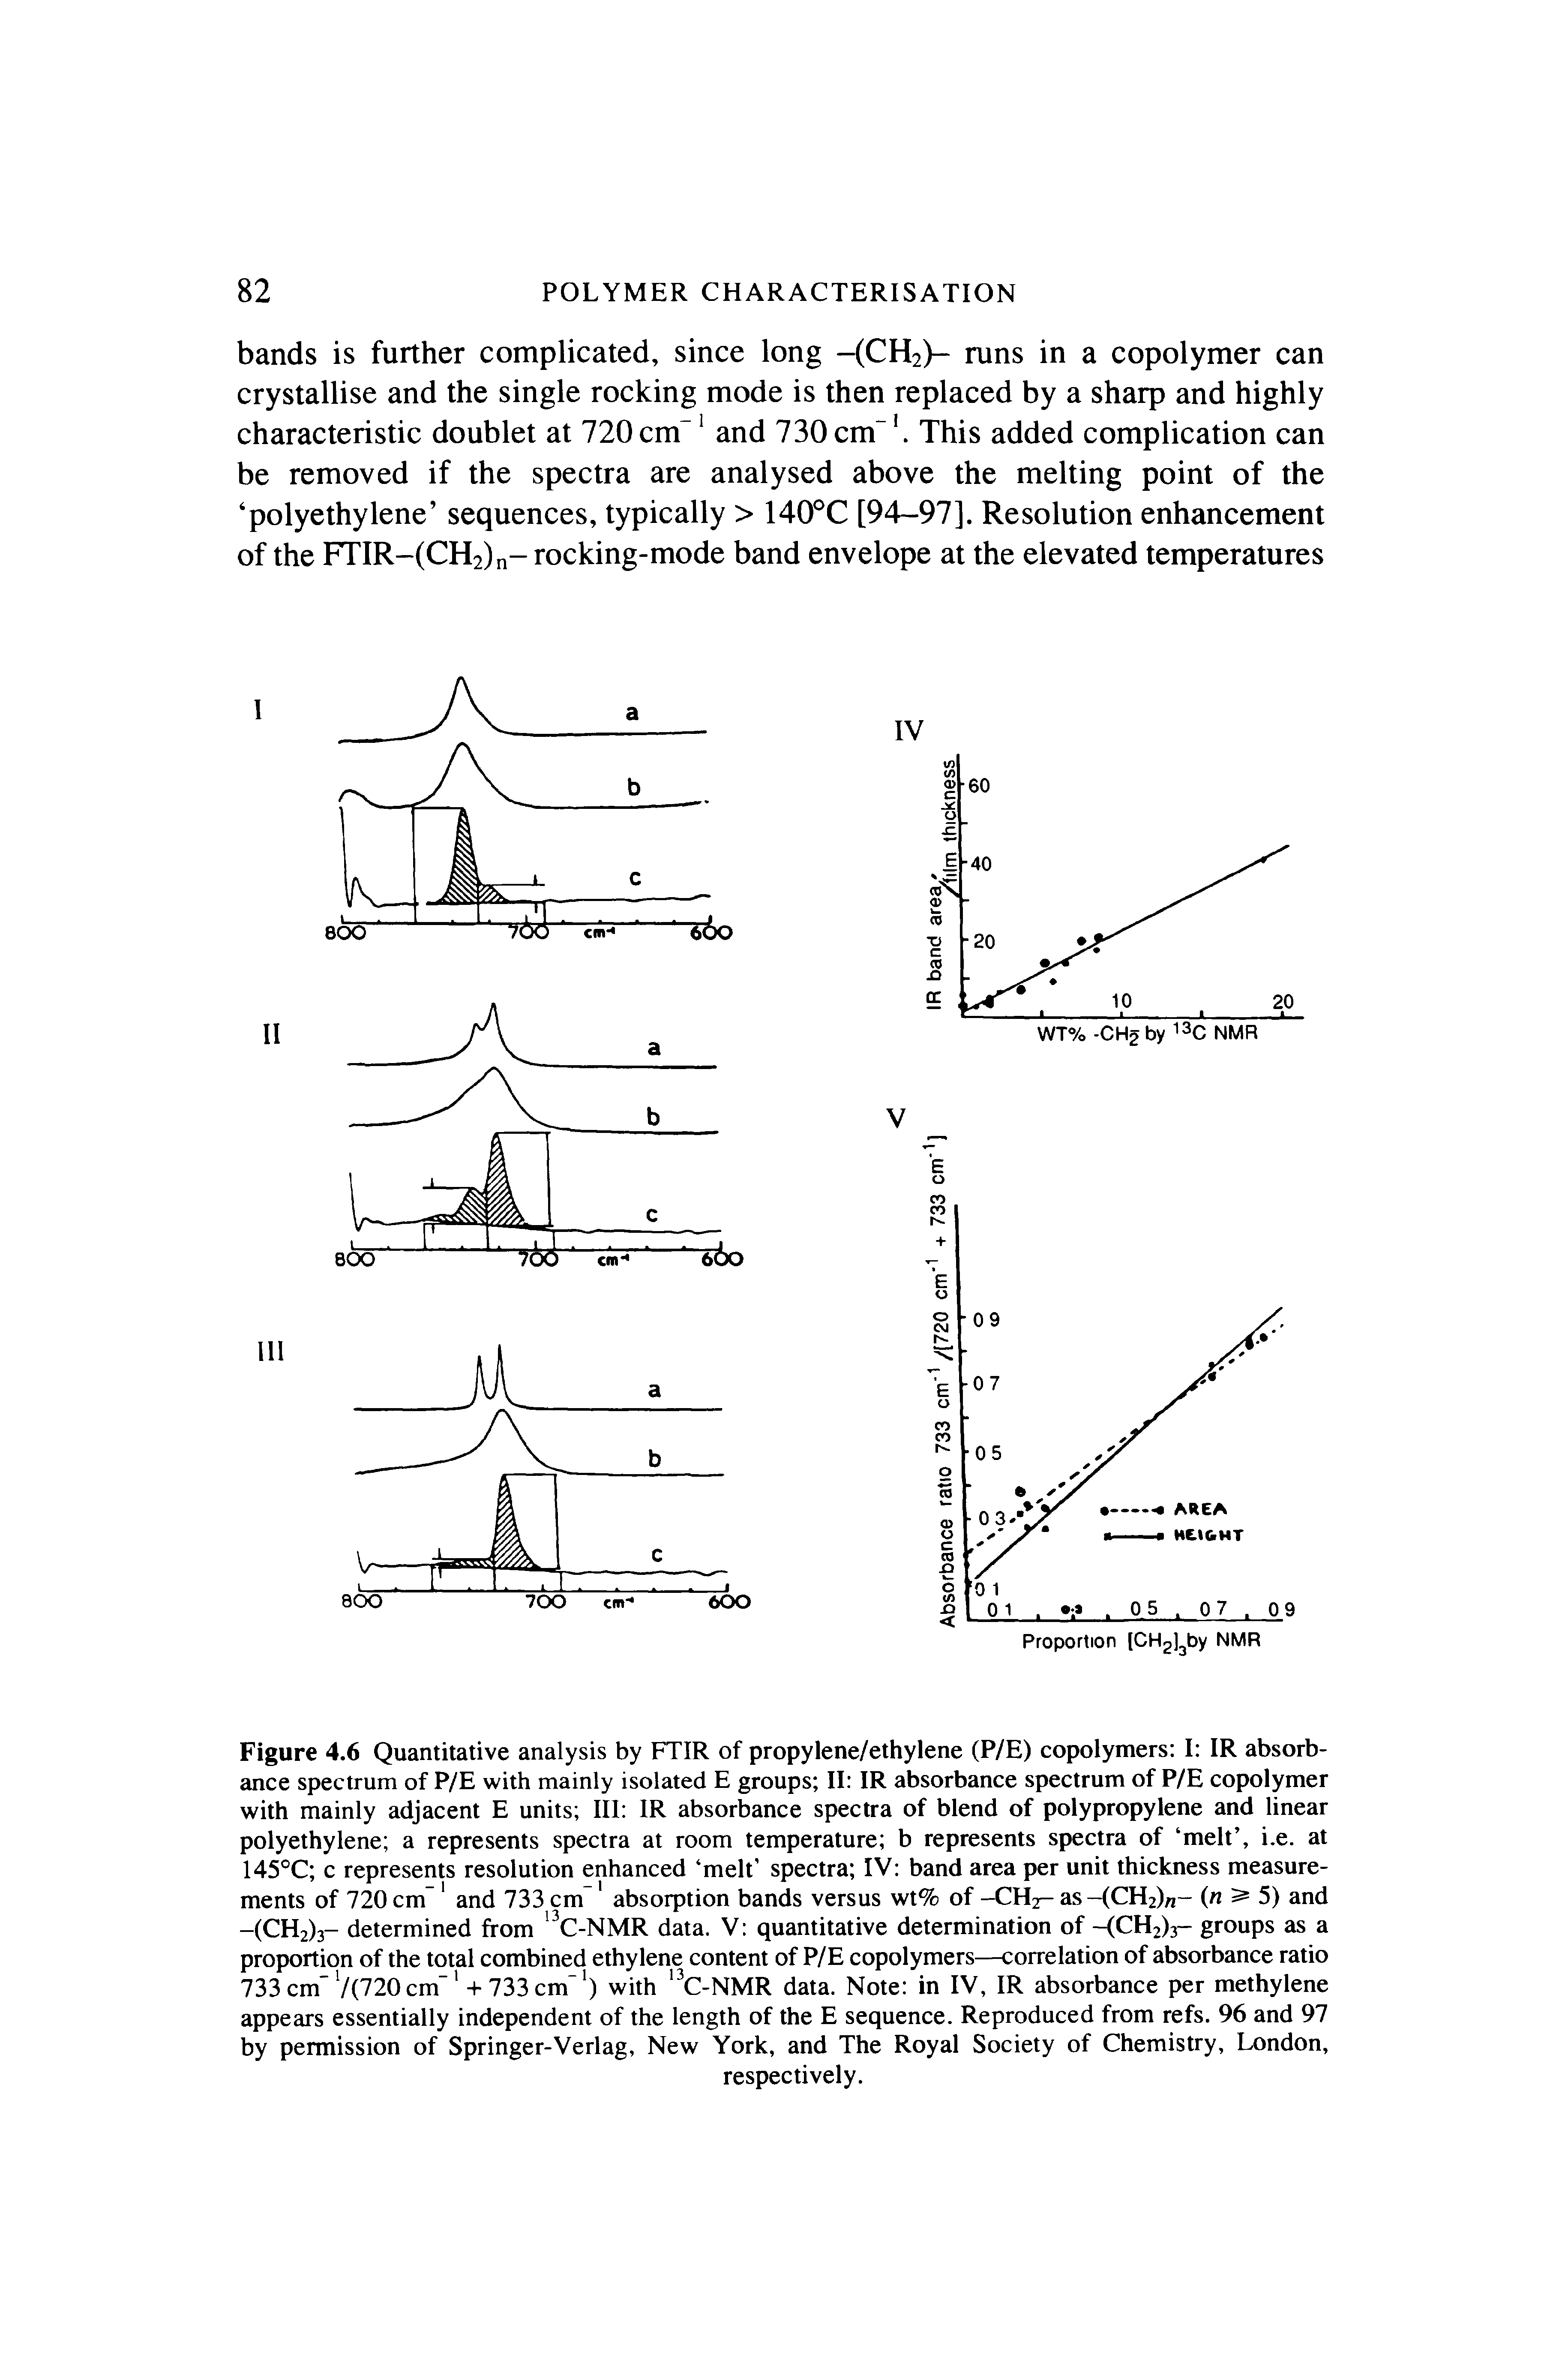 Figure 4.6 Quantitative analysis by FTIR of propylene/ethylene (P/E) copolymers I IR absorbance spectrum of P/E with mainly isolated E groups II IR absorbance spectrum of P/E copolymer with mainly adjacent E units III IR absorbance spectra of blend of polypropylene and linear polyethylene a represents spectra at room temperature b represents spectra of melt , i.e. at 145°C c represents resolution enhanced melt spectra IV band area per unit thickness measurements of 720 cm and 733 cm absorption bands versus wt% of -CH2- as-(CH2)/i- ( 5) and -(CH2)3- determined from C-NMR data. V quantitative determination of -(CH2)3- groups as a proportion of the total combined ethylene content of P/E copolymers—correlation of absorbance ratio 733cm V(720cm + 733cm ) with C-NMR data. Note in IV, IR absorbance per methylene appears essentially independent of the length of the E sequence. Reproduced from refs. 96 and 97 by permission of Springer-Verlag, New York, and The Royal Society of Chemistry, London,...